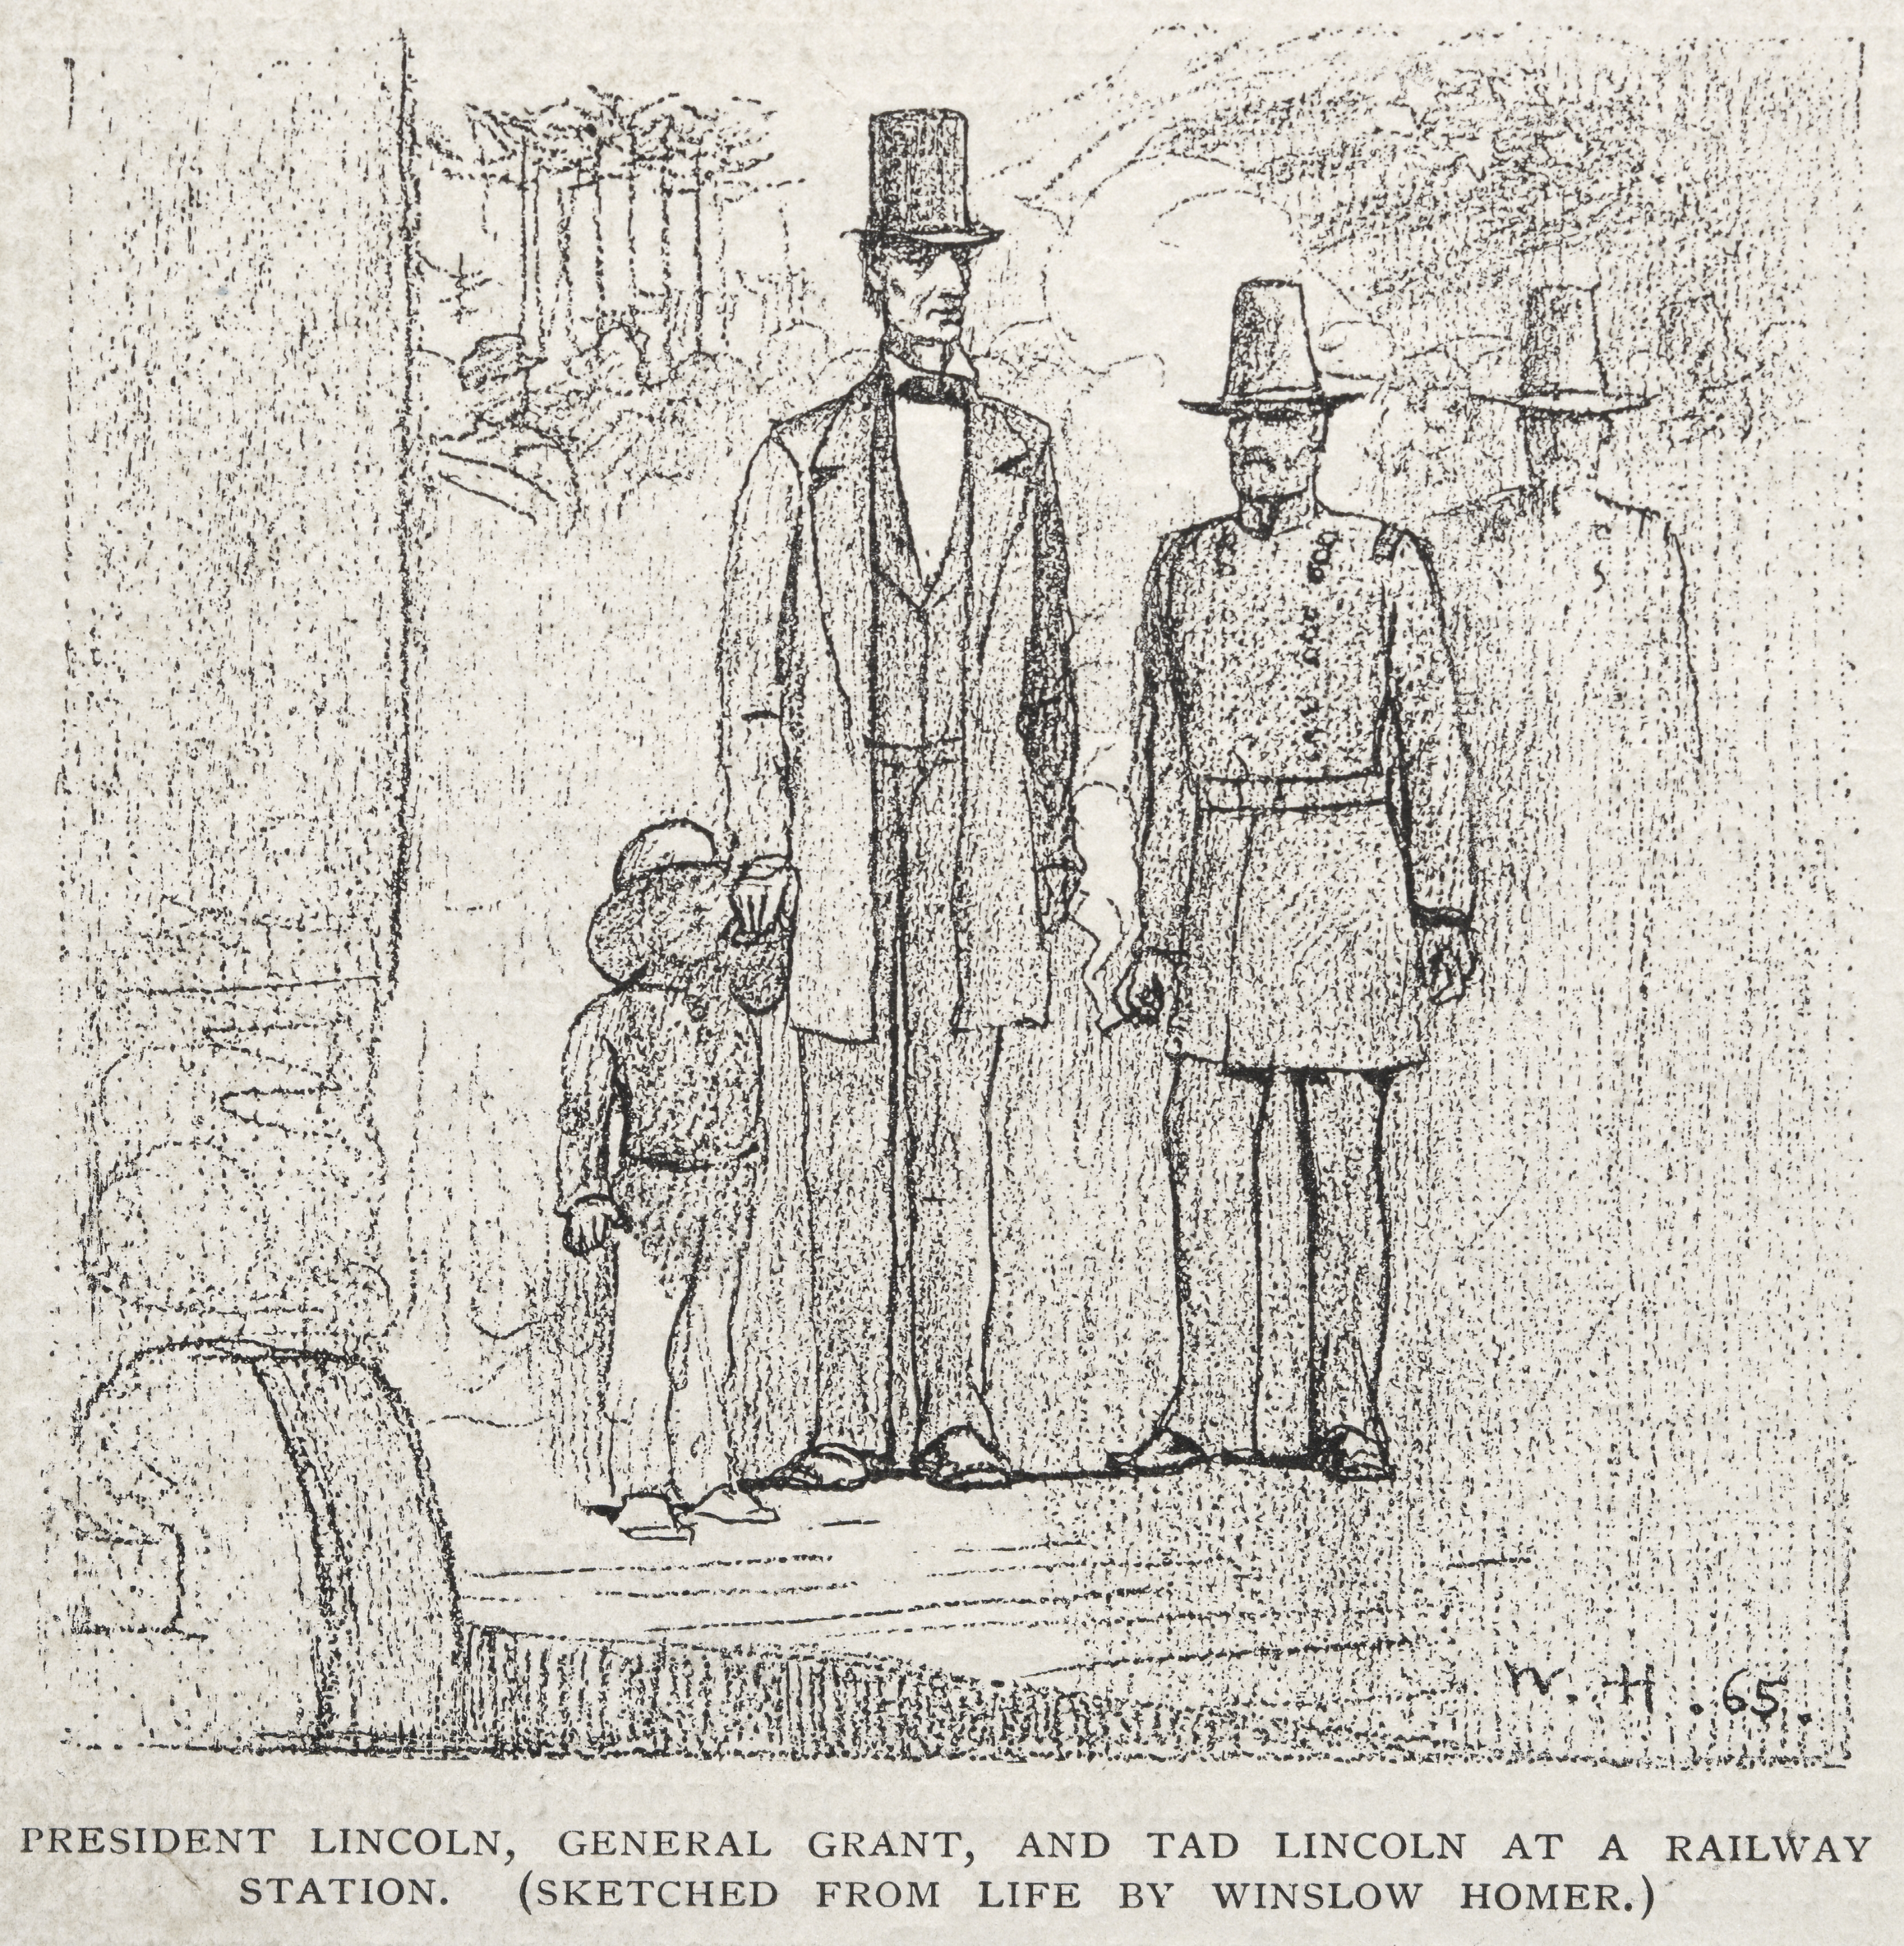 President Lincoln, General Grant, and Tad Lincoln at a Railway Station